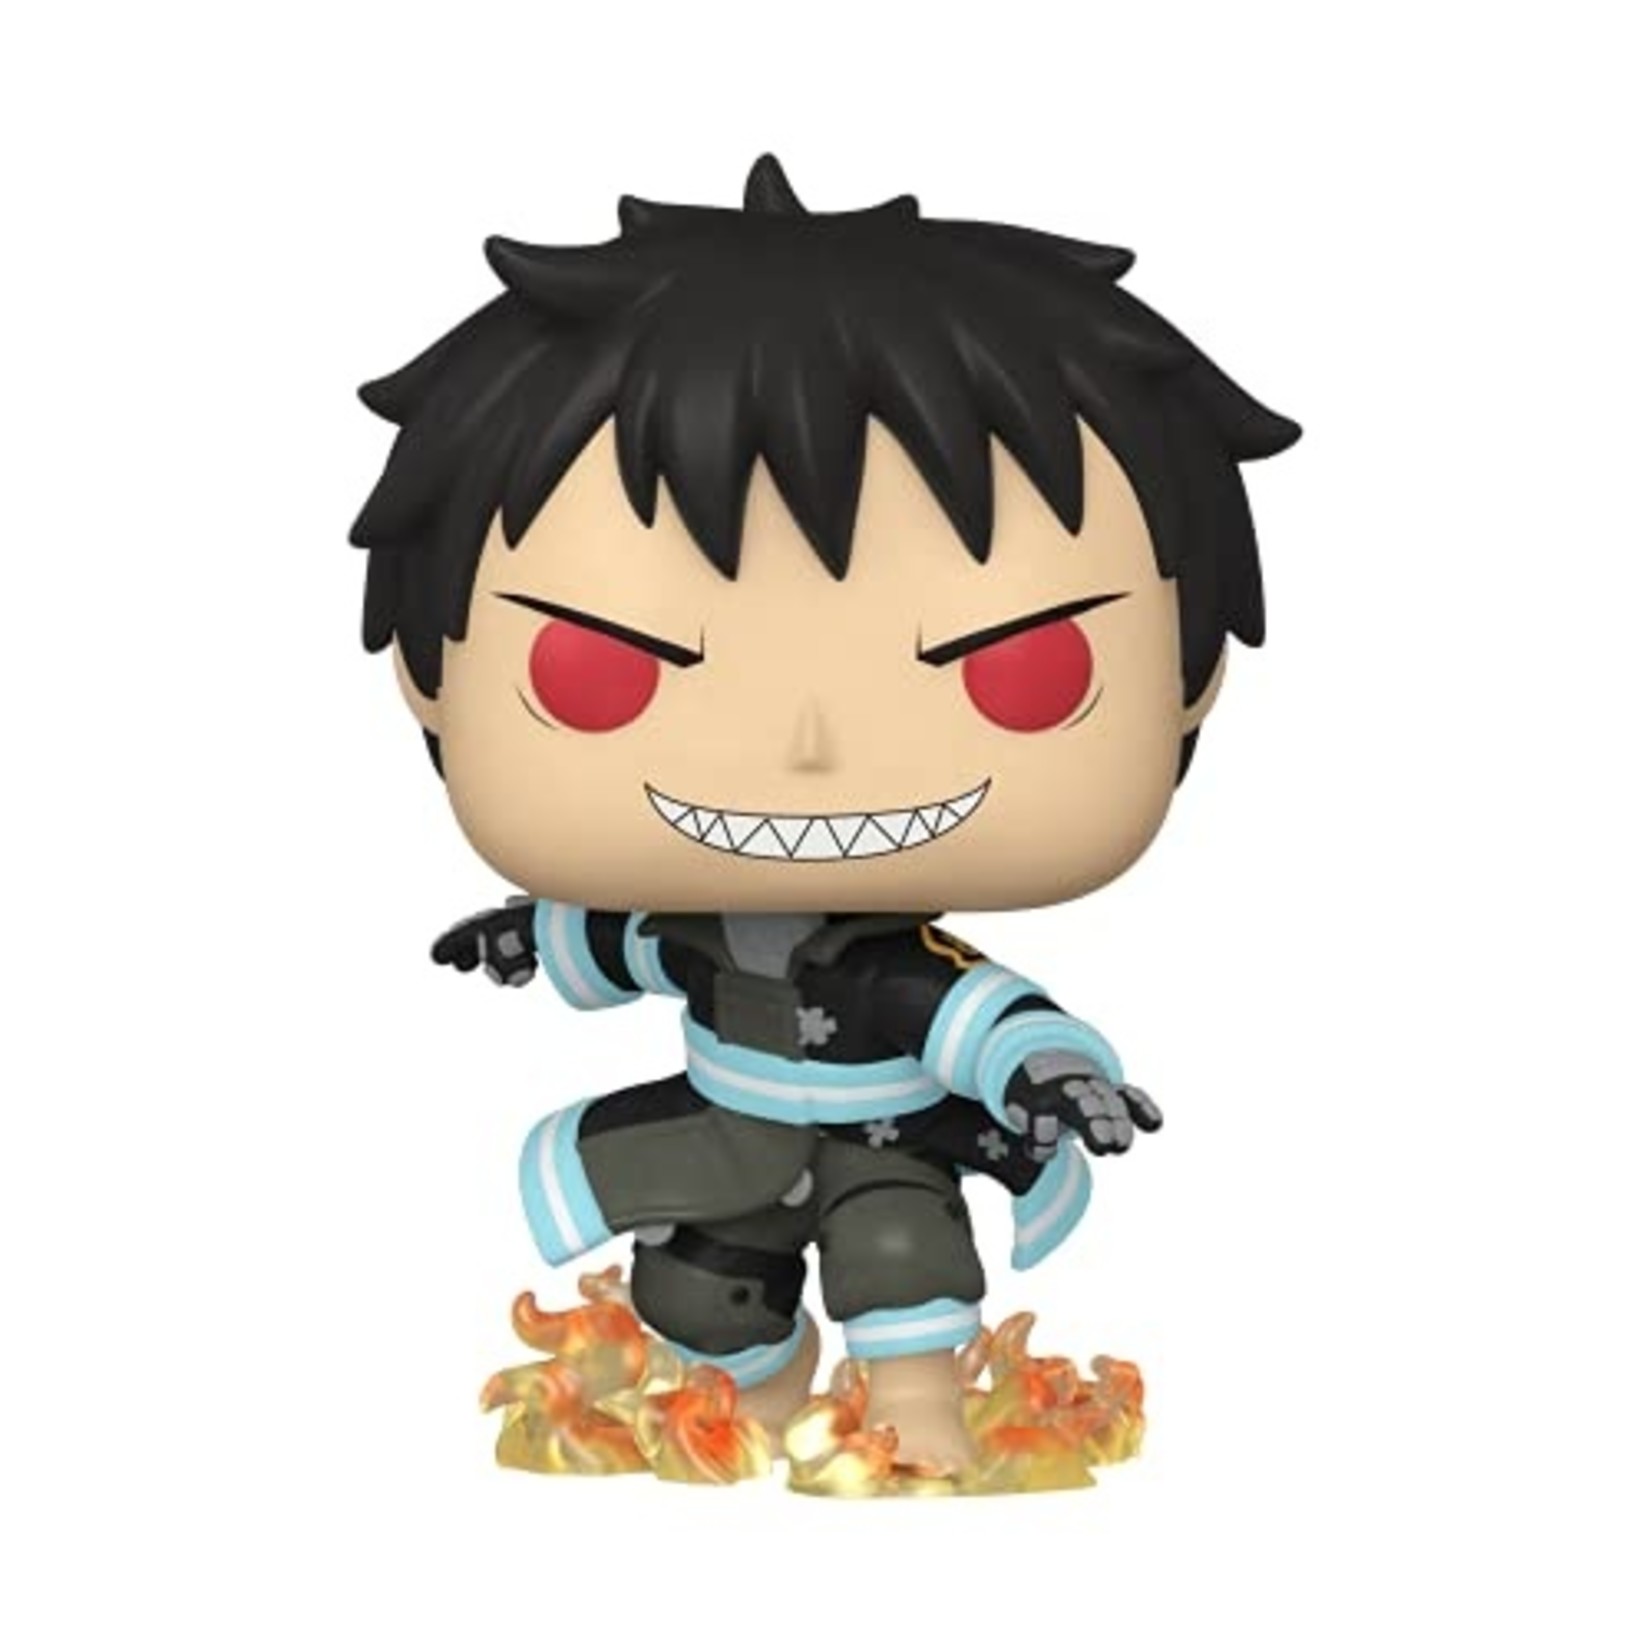 Funko Funko POP! Animation: Fire Force - Shinra with Fire